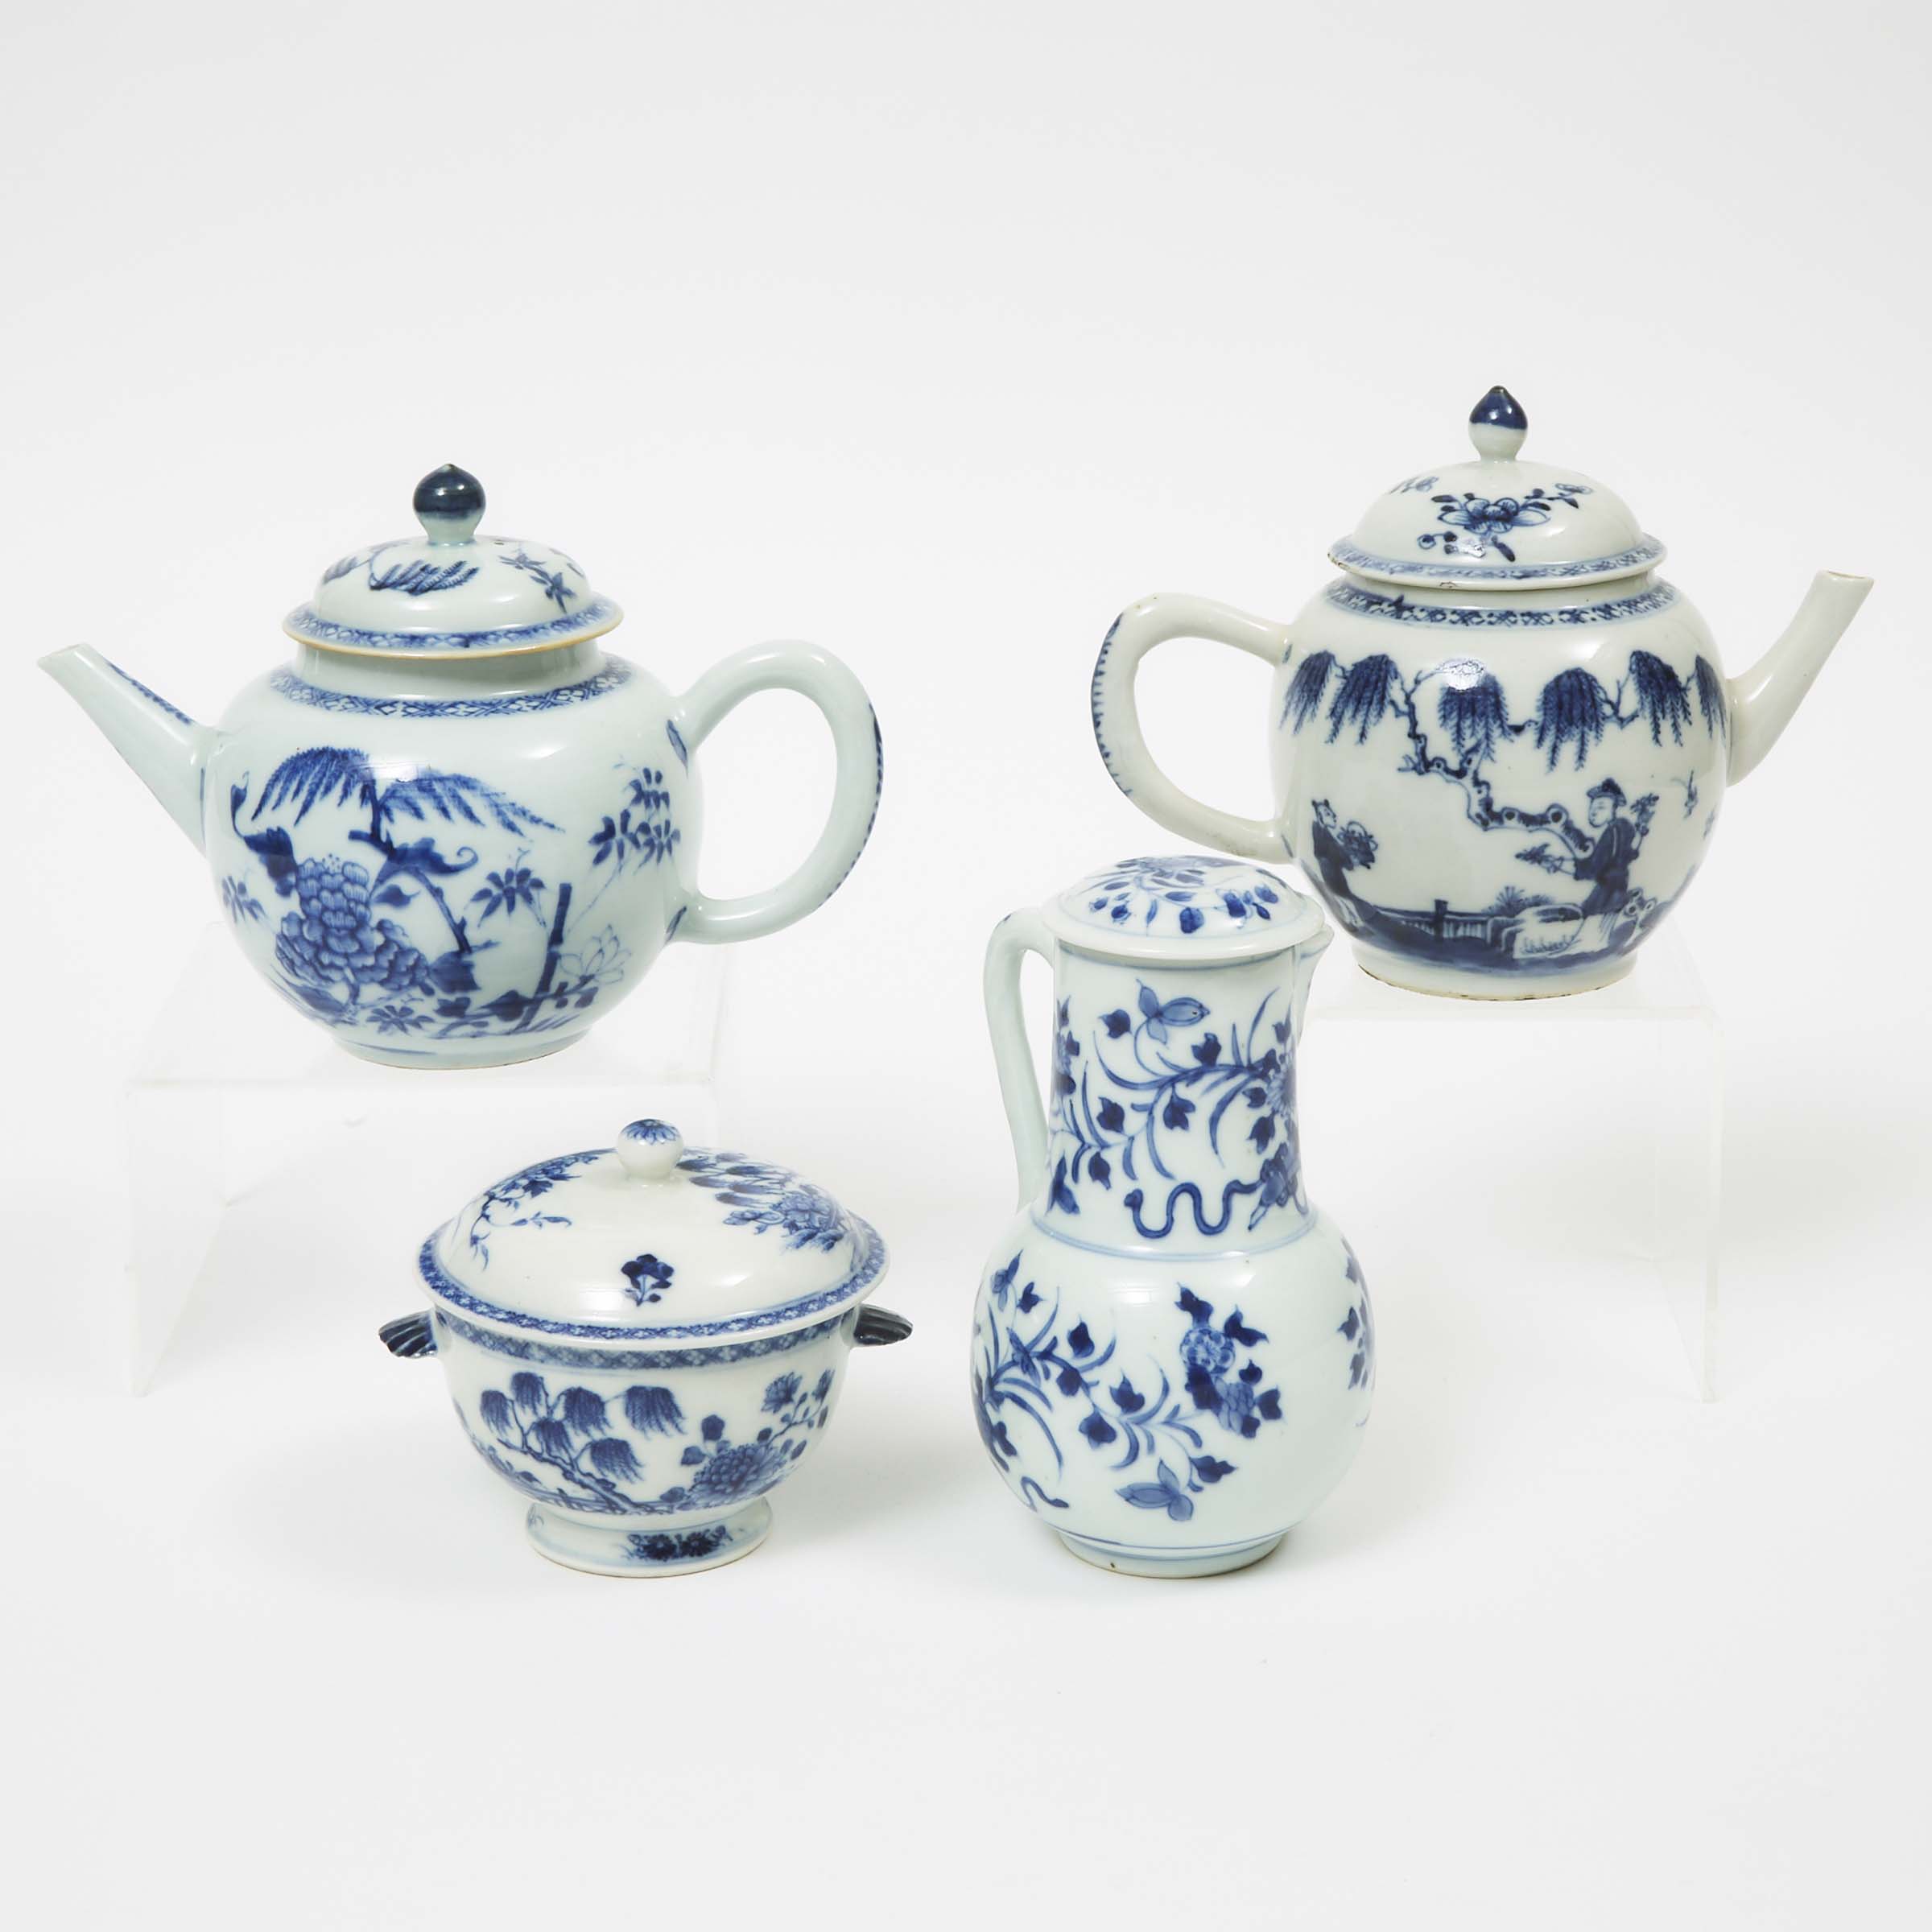 Two Chinese Export Blue and White Teapots, together with a Lidded Creamer and Sugar Bowl, 18th/19th Century